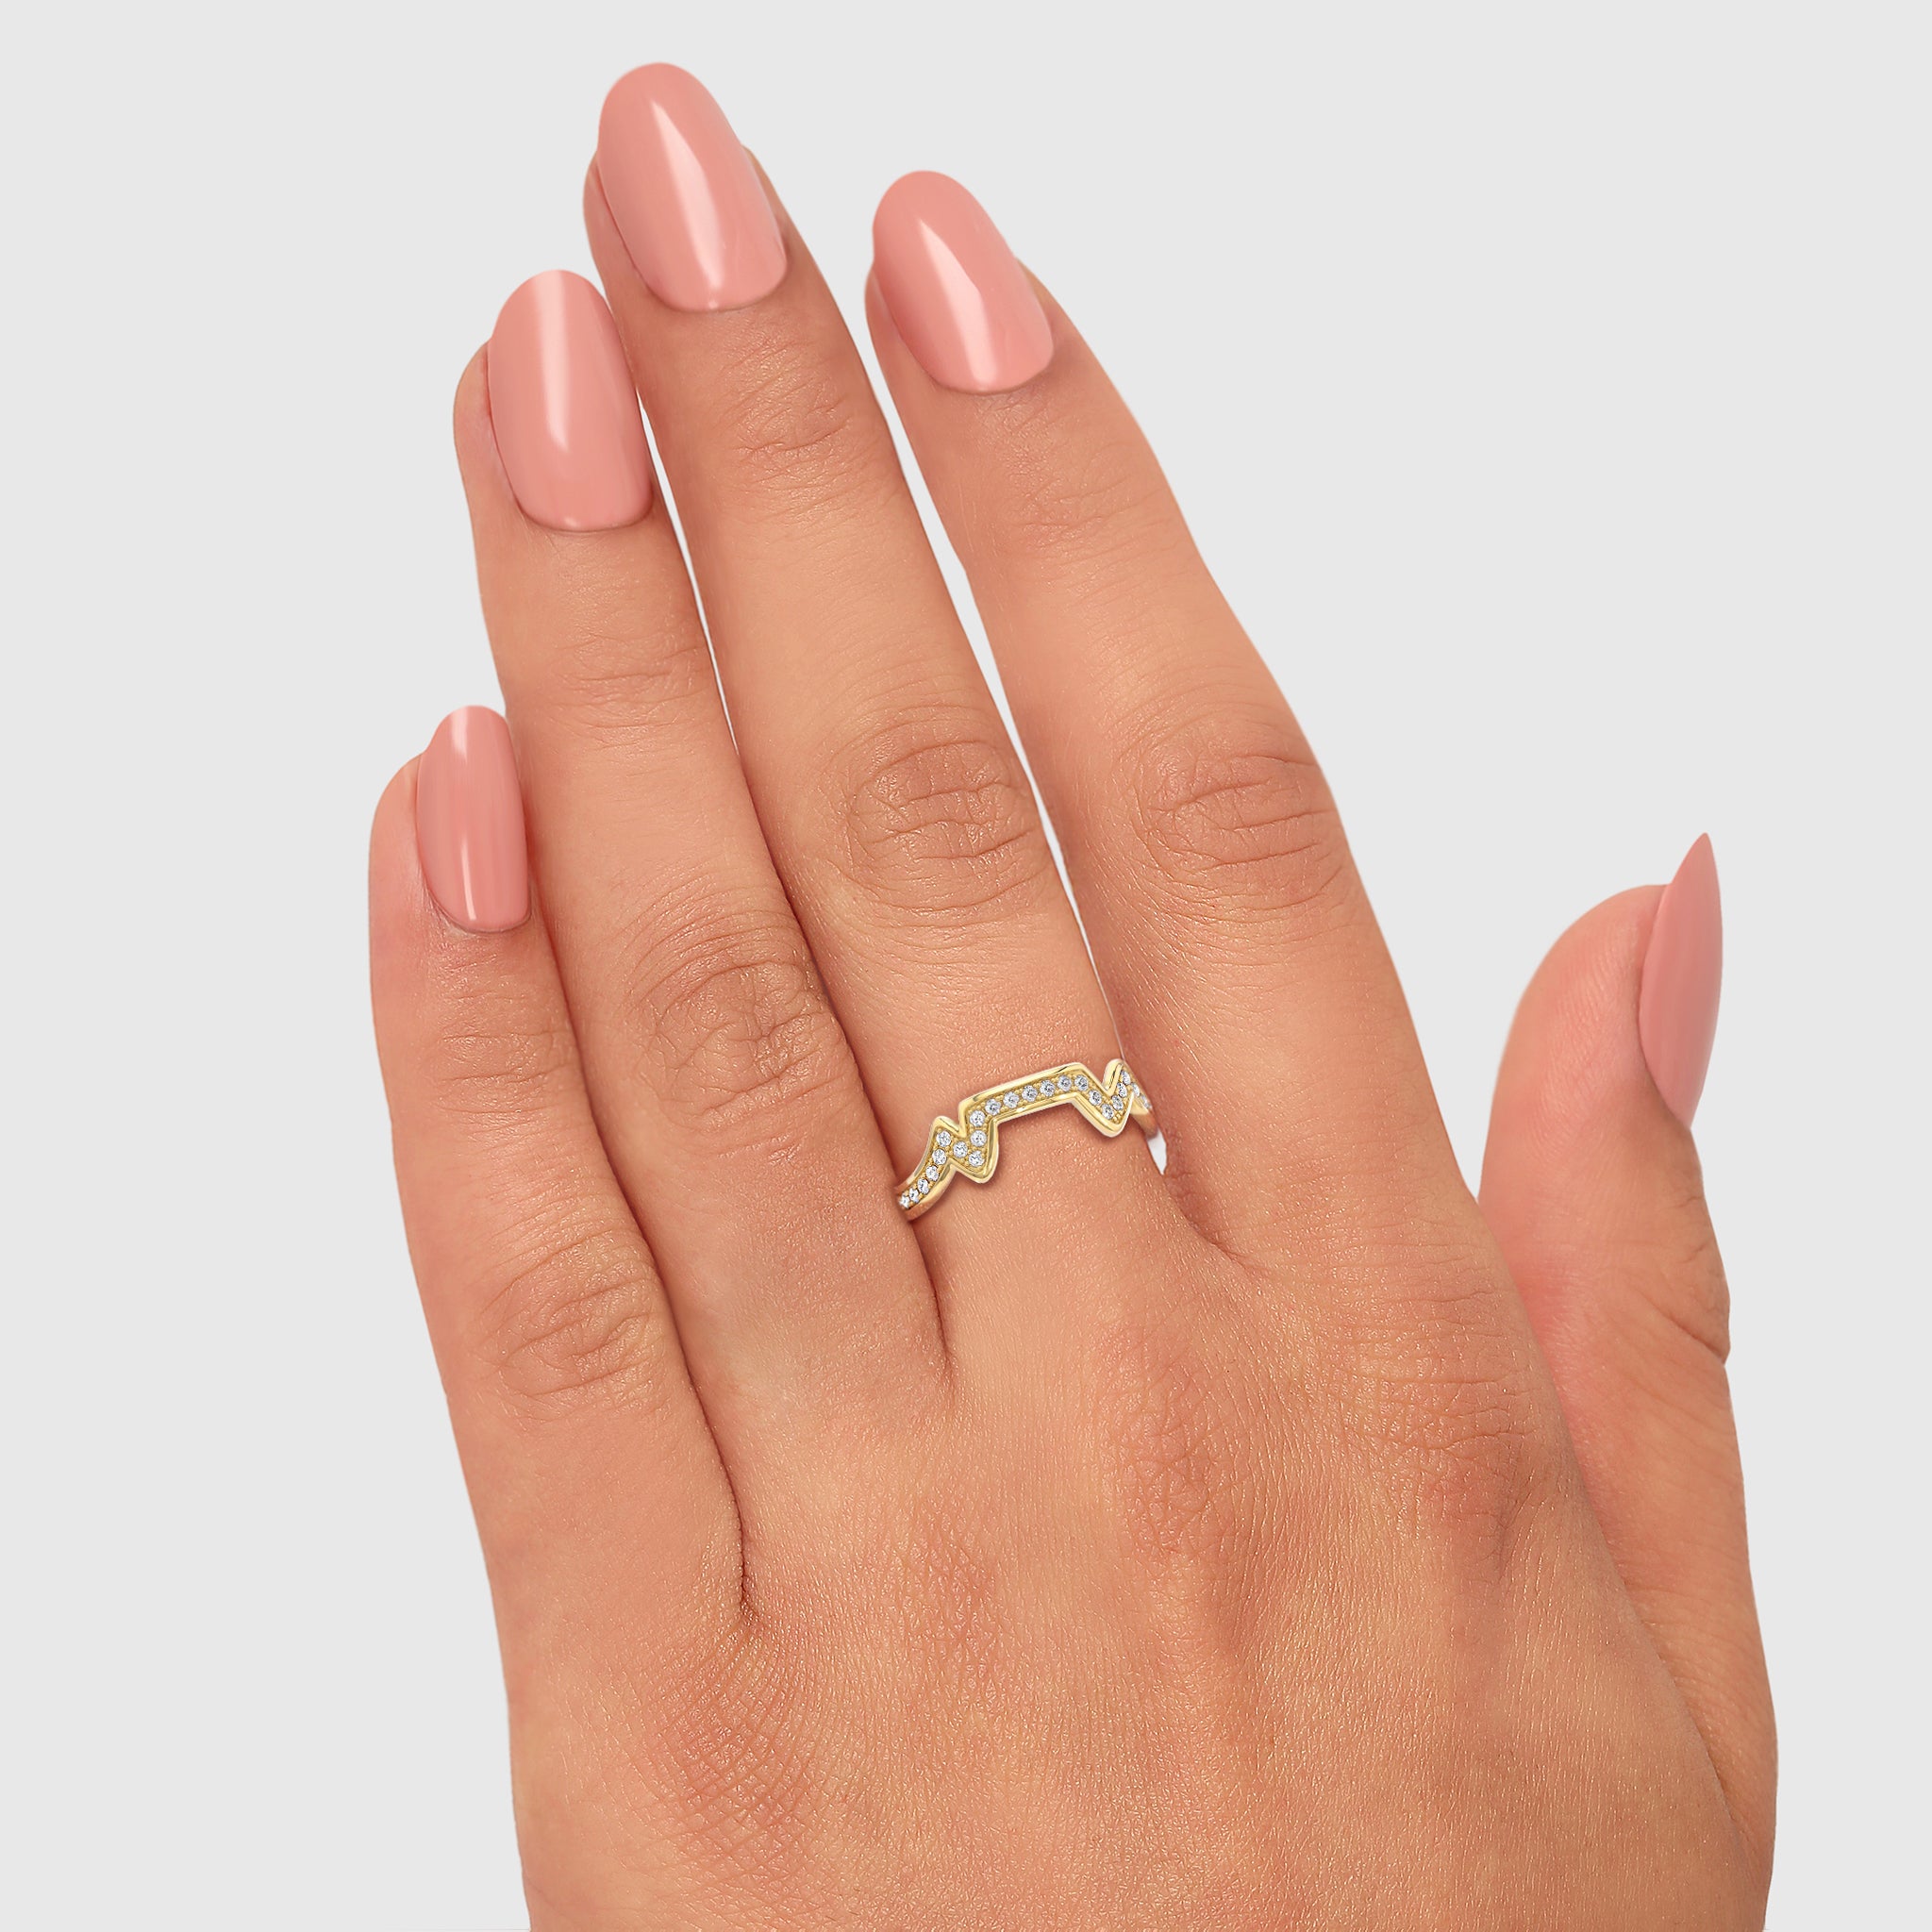 Shimansky - Women Wearing the Table Mountain Pave Diamond Ring Crafted in 14K Yellow Gold